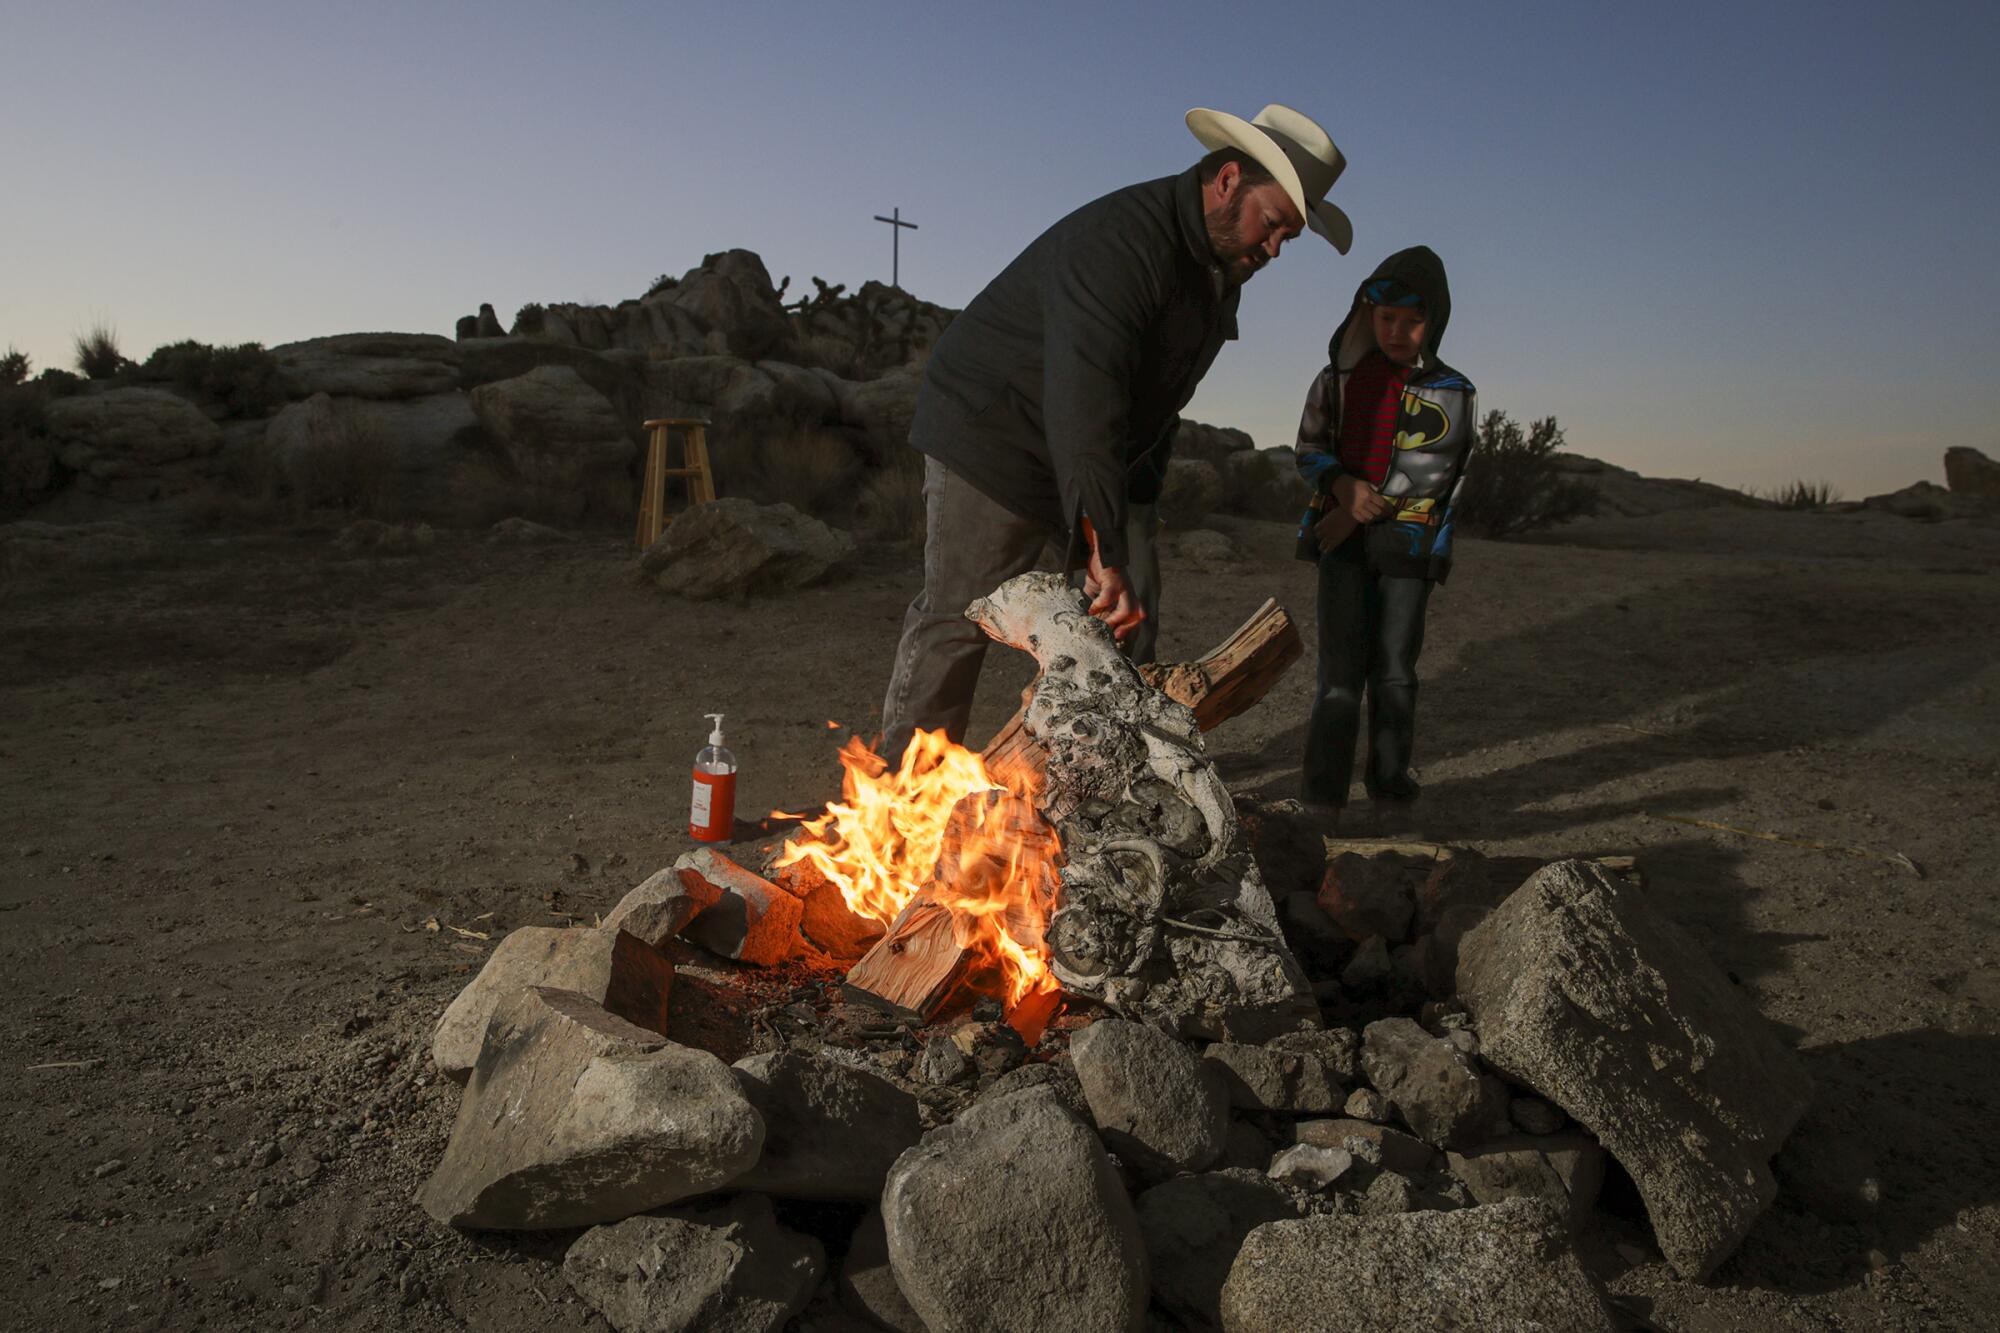 A man and his son around a campfire in a rock pit in the desert